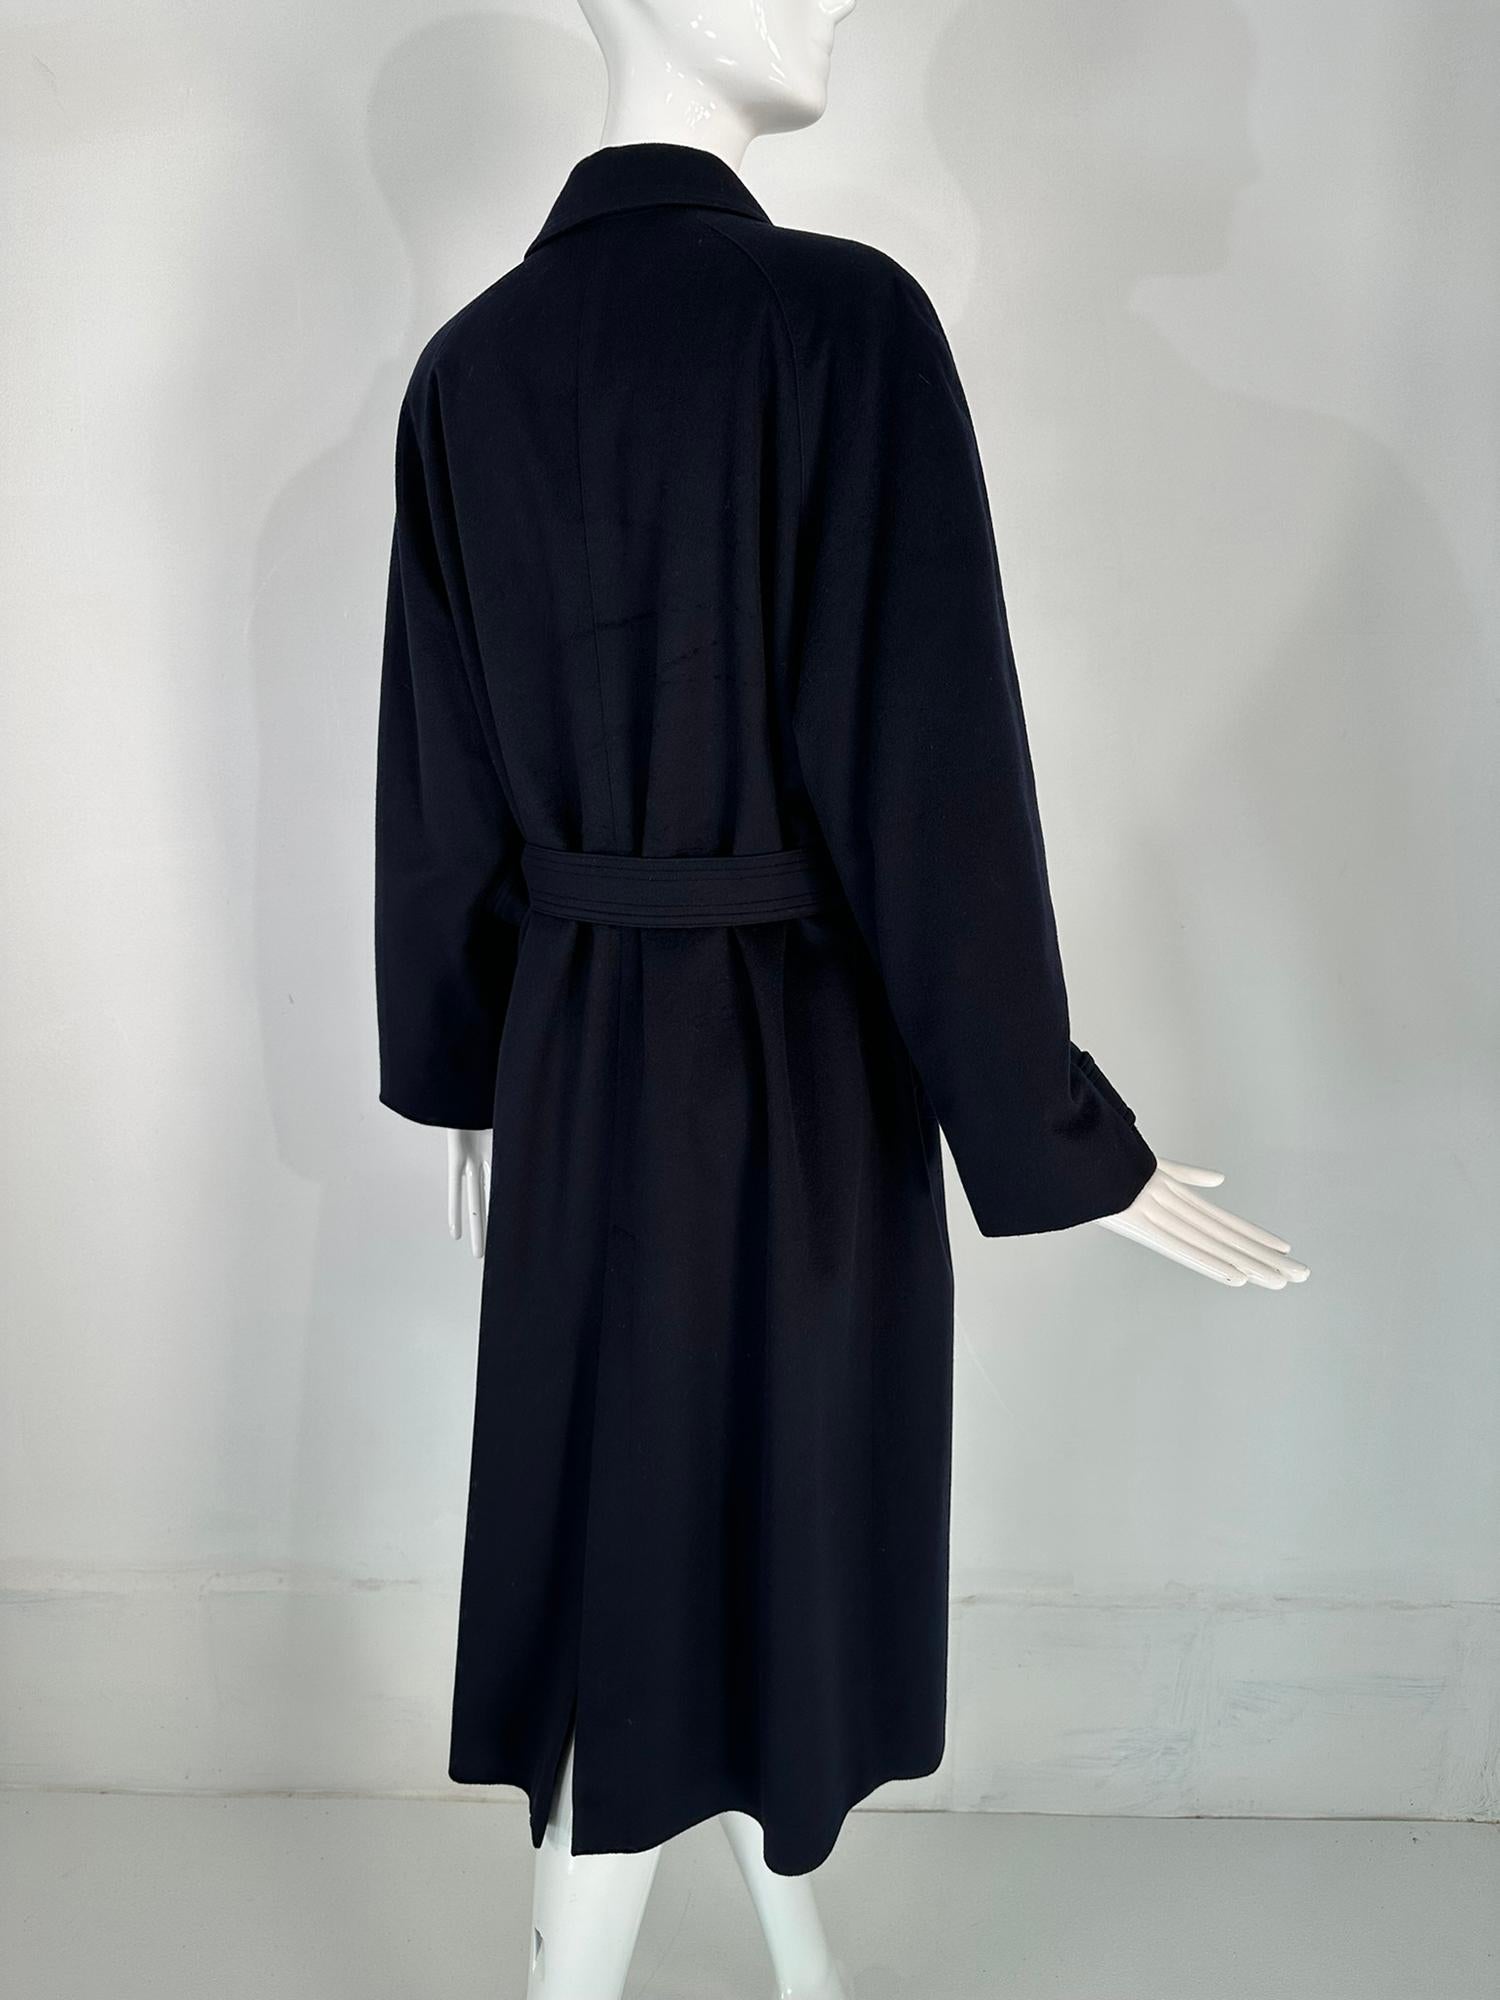 Giorgio Armani Classico Navy Blue Cashmere Raglan Sleeve Belted Over Coat  For Sale 3